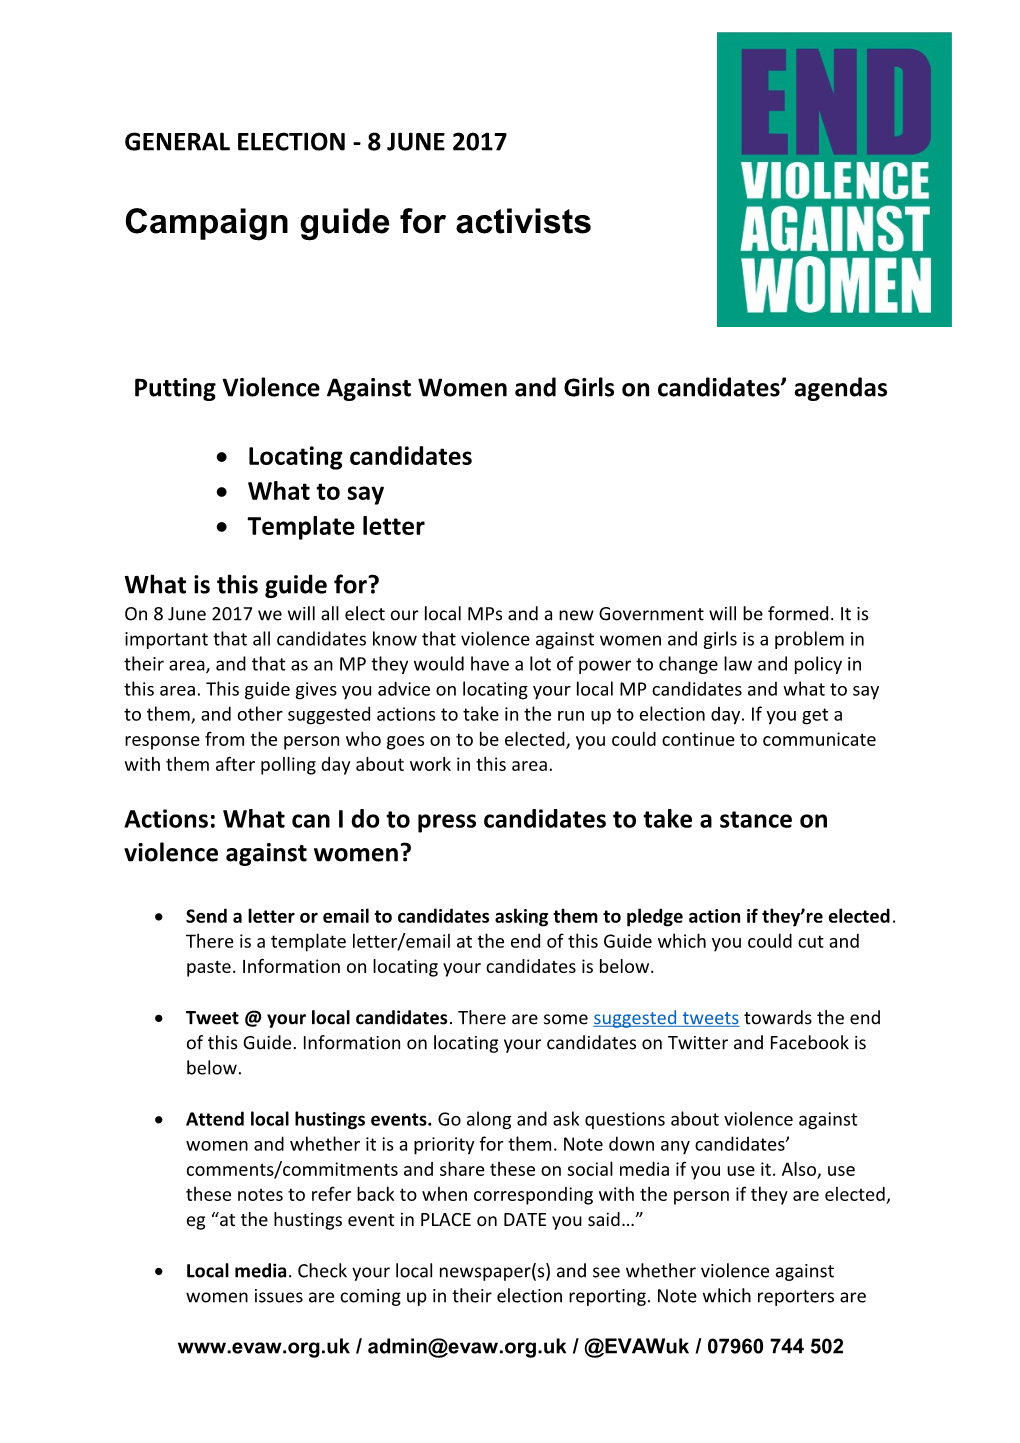 Campaign Guide for Activists